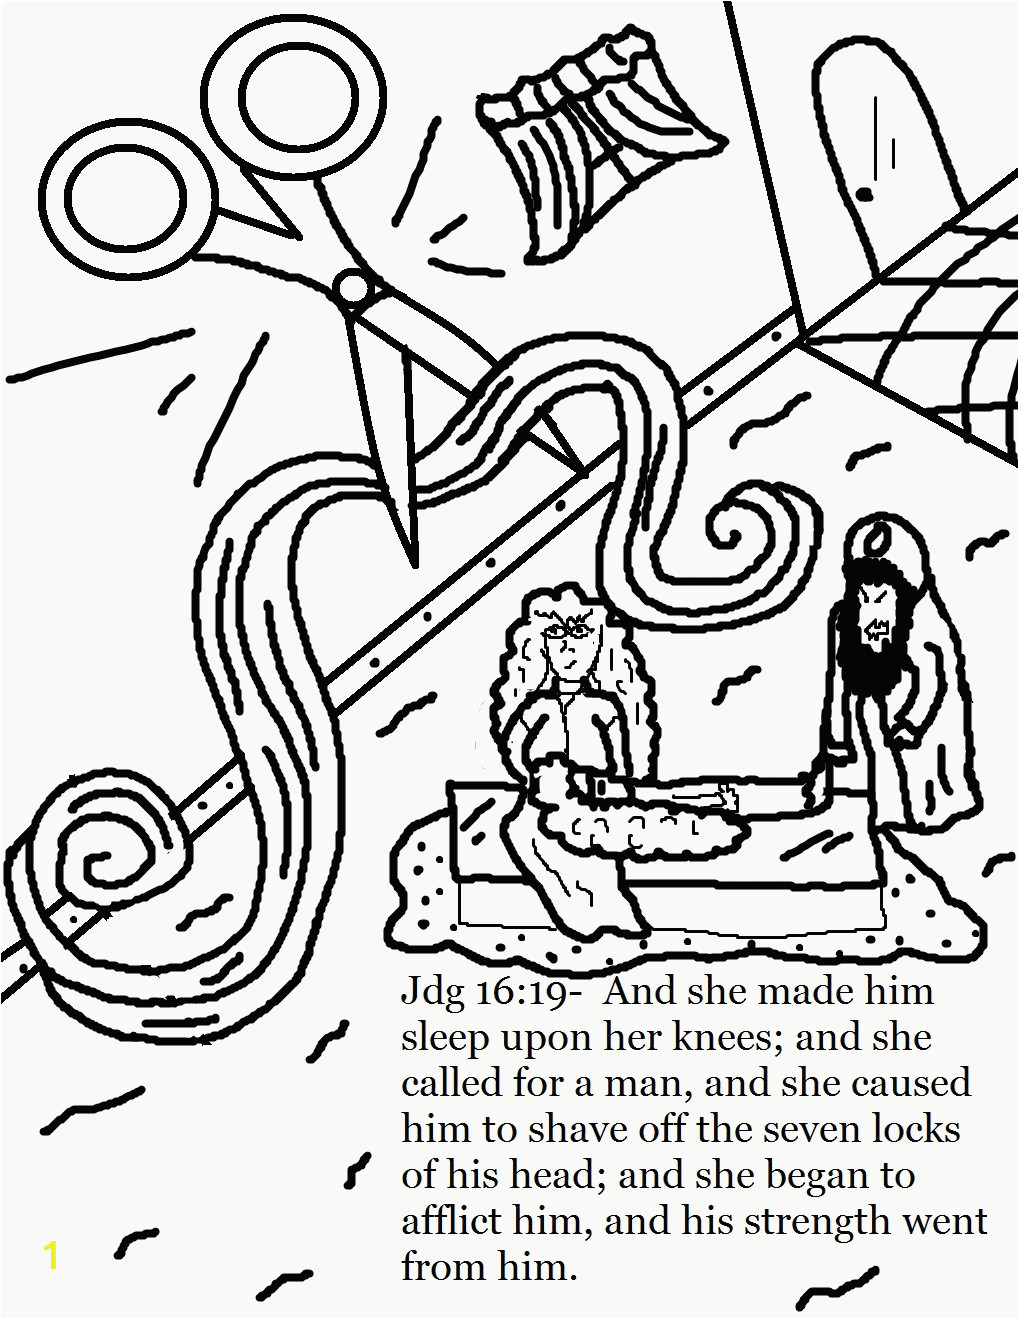 samson and delilah coloring pages